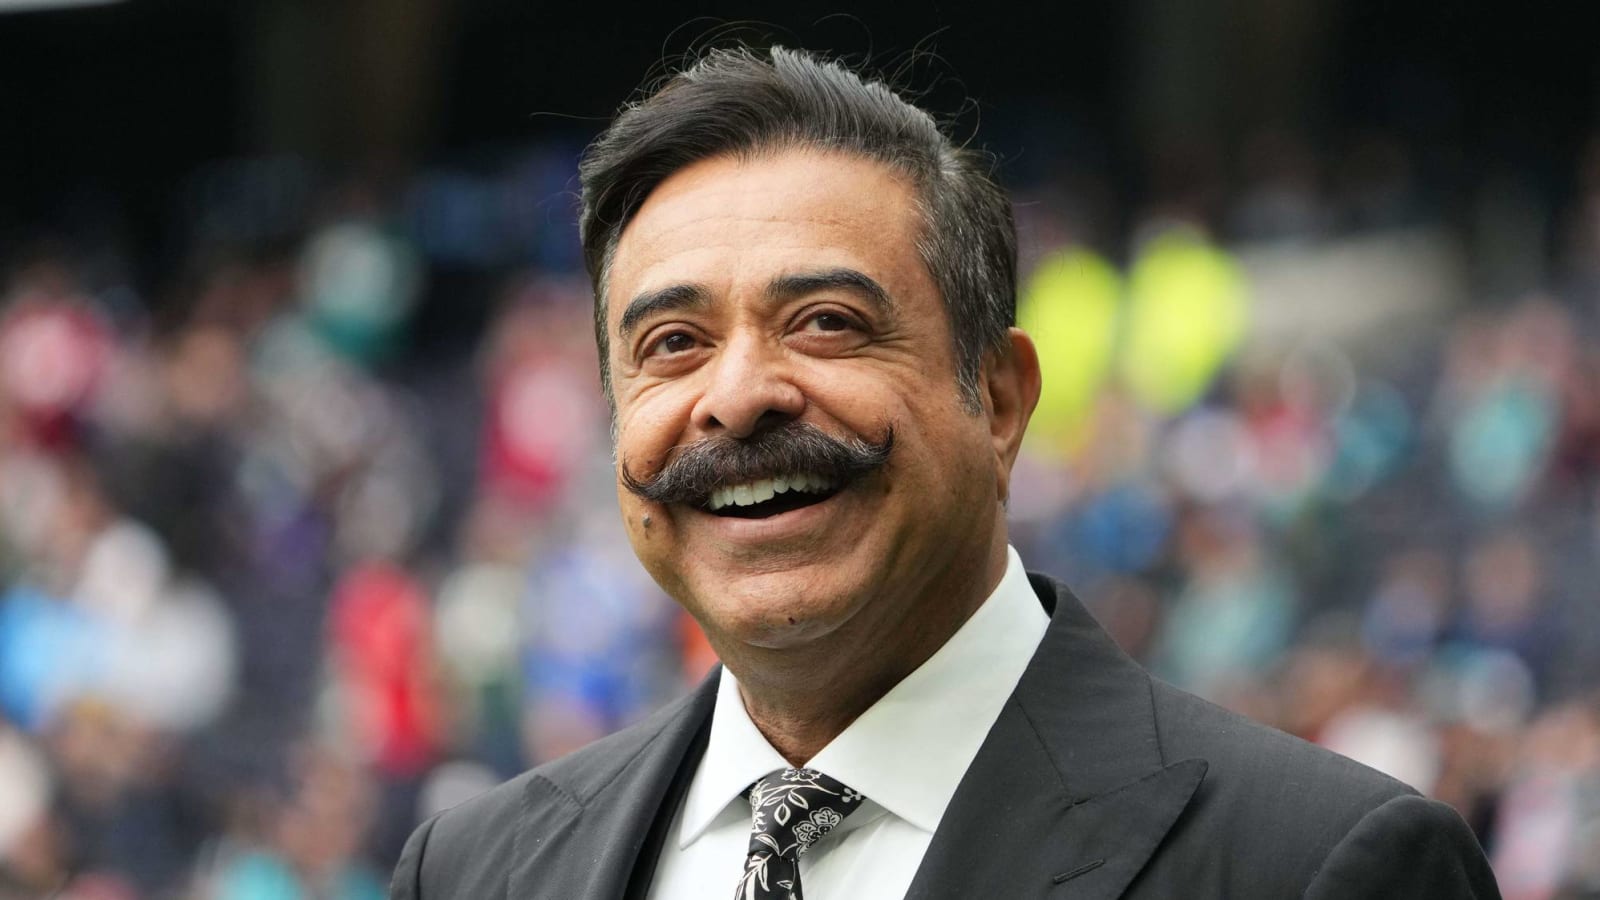 Jaguars owner had message for coaches about media leaks